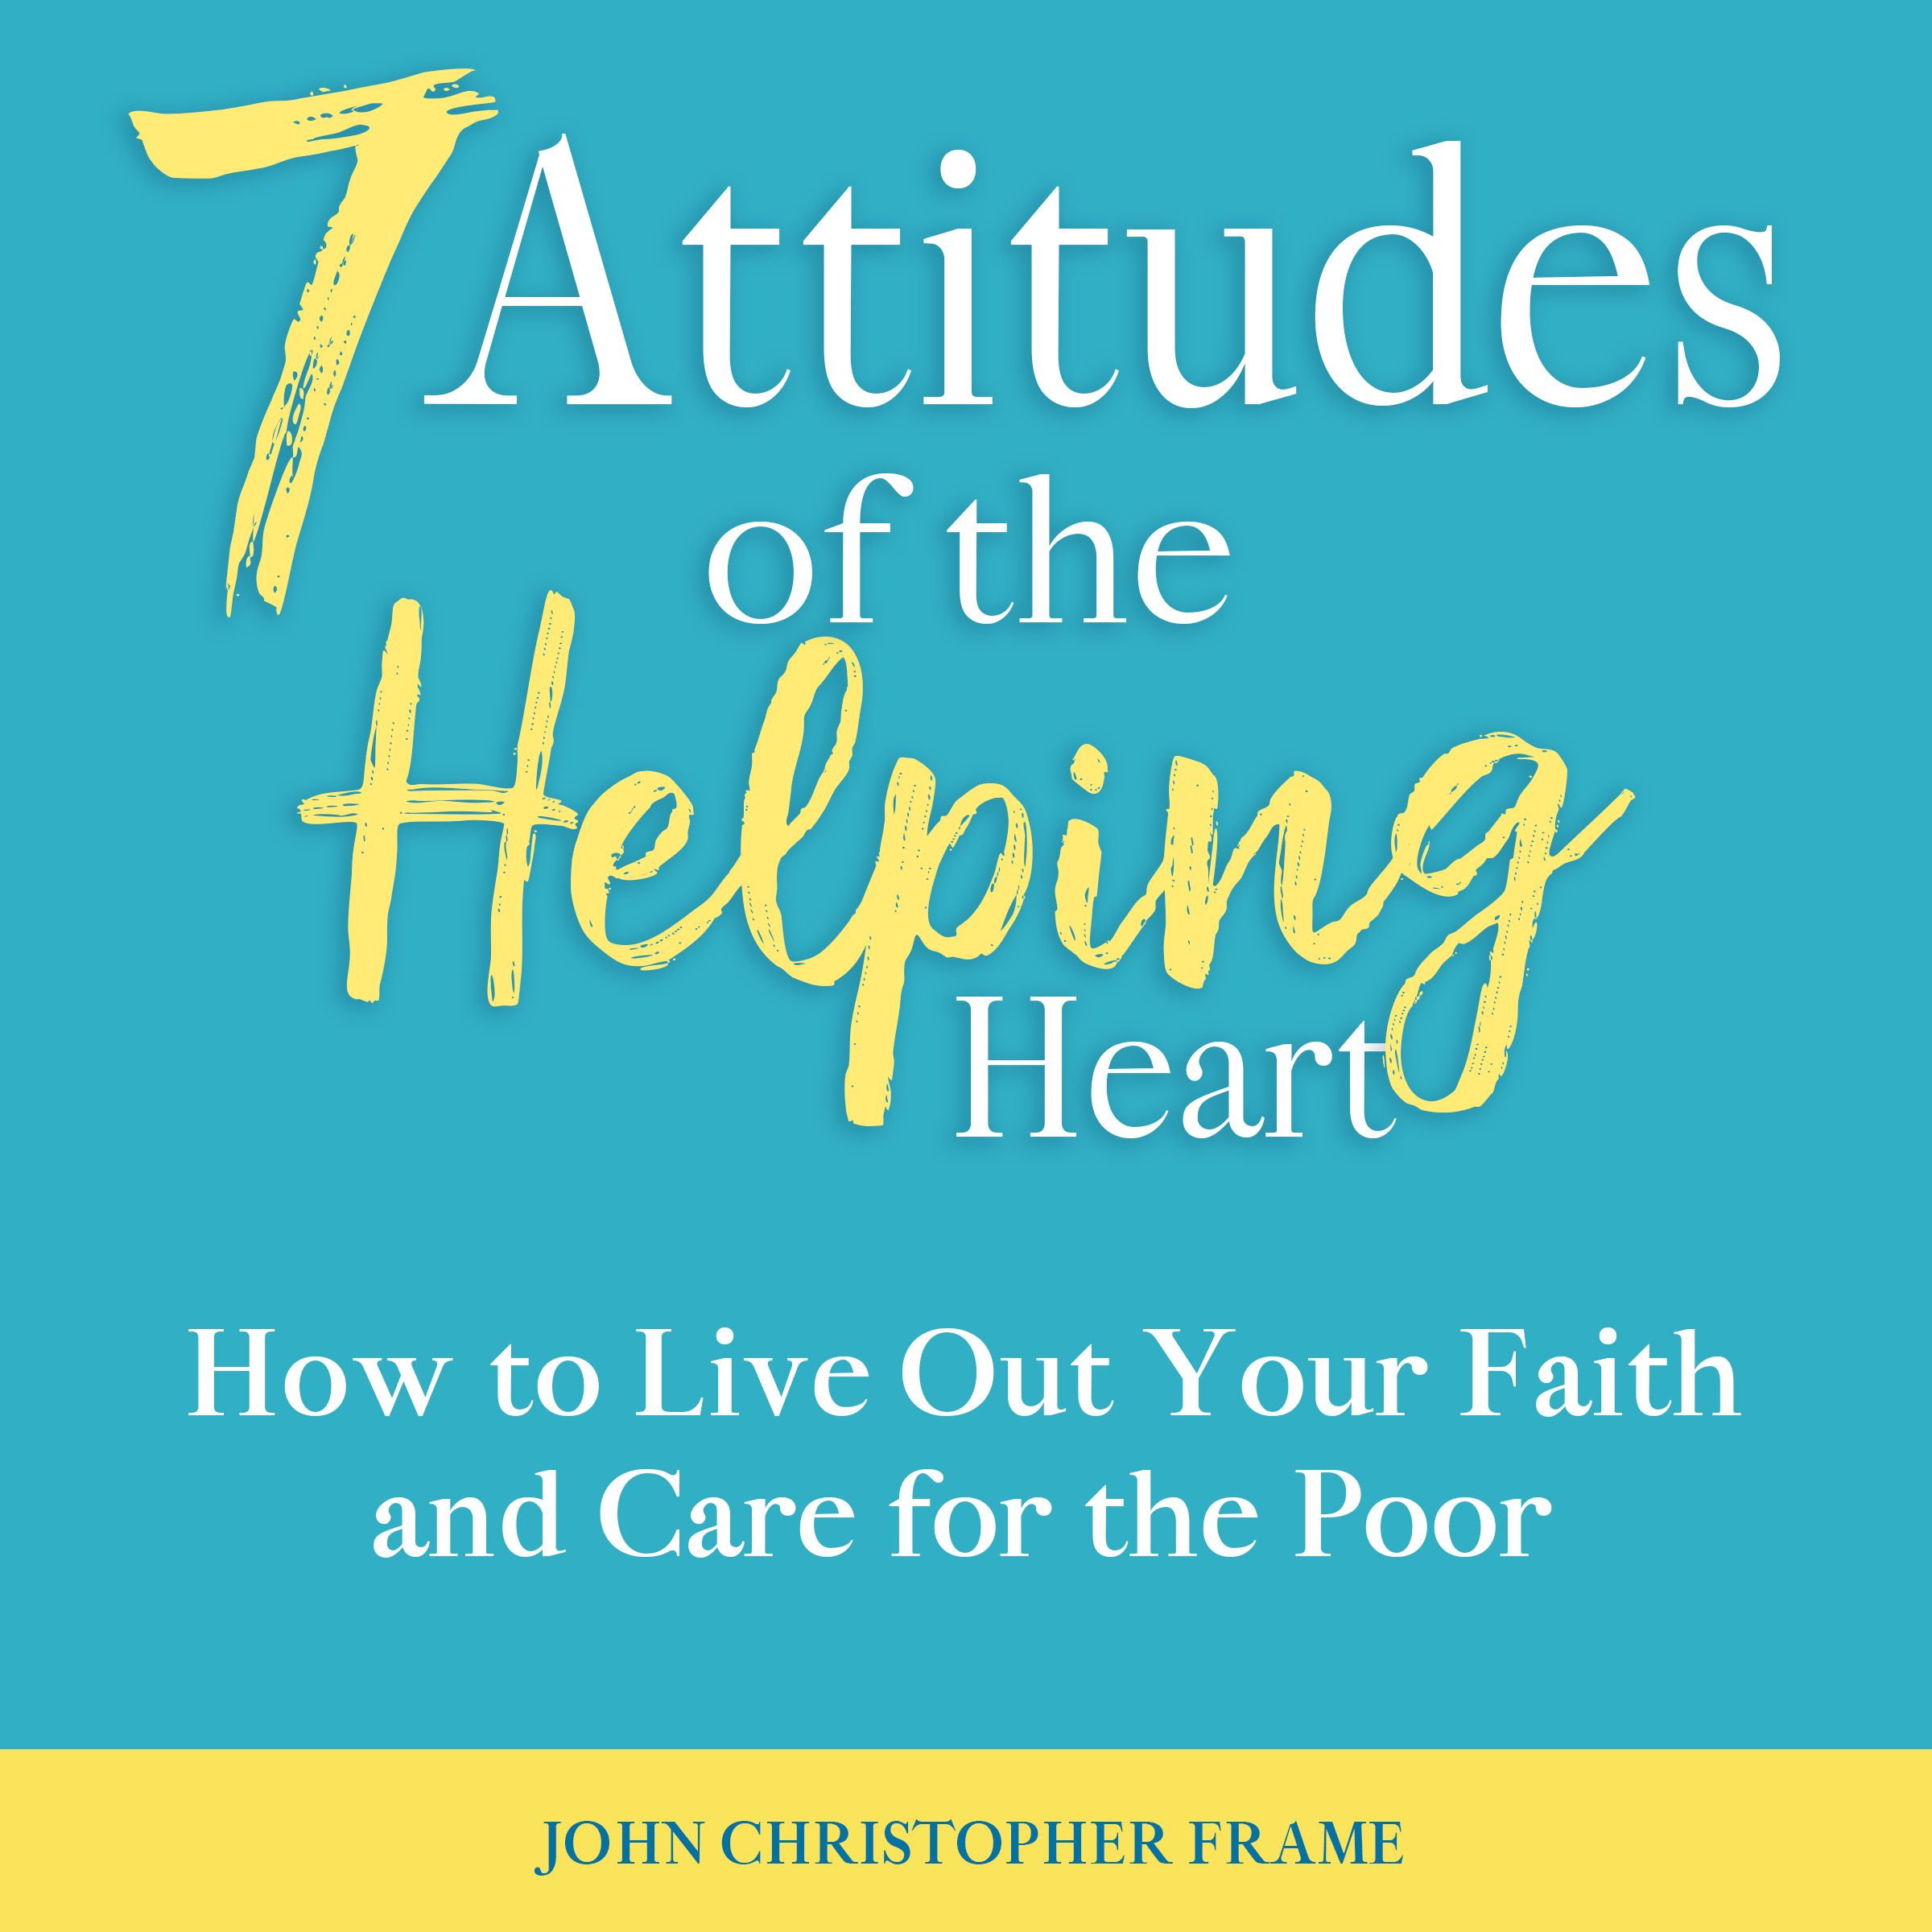 7 attitudes of the helping heart